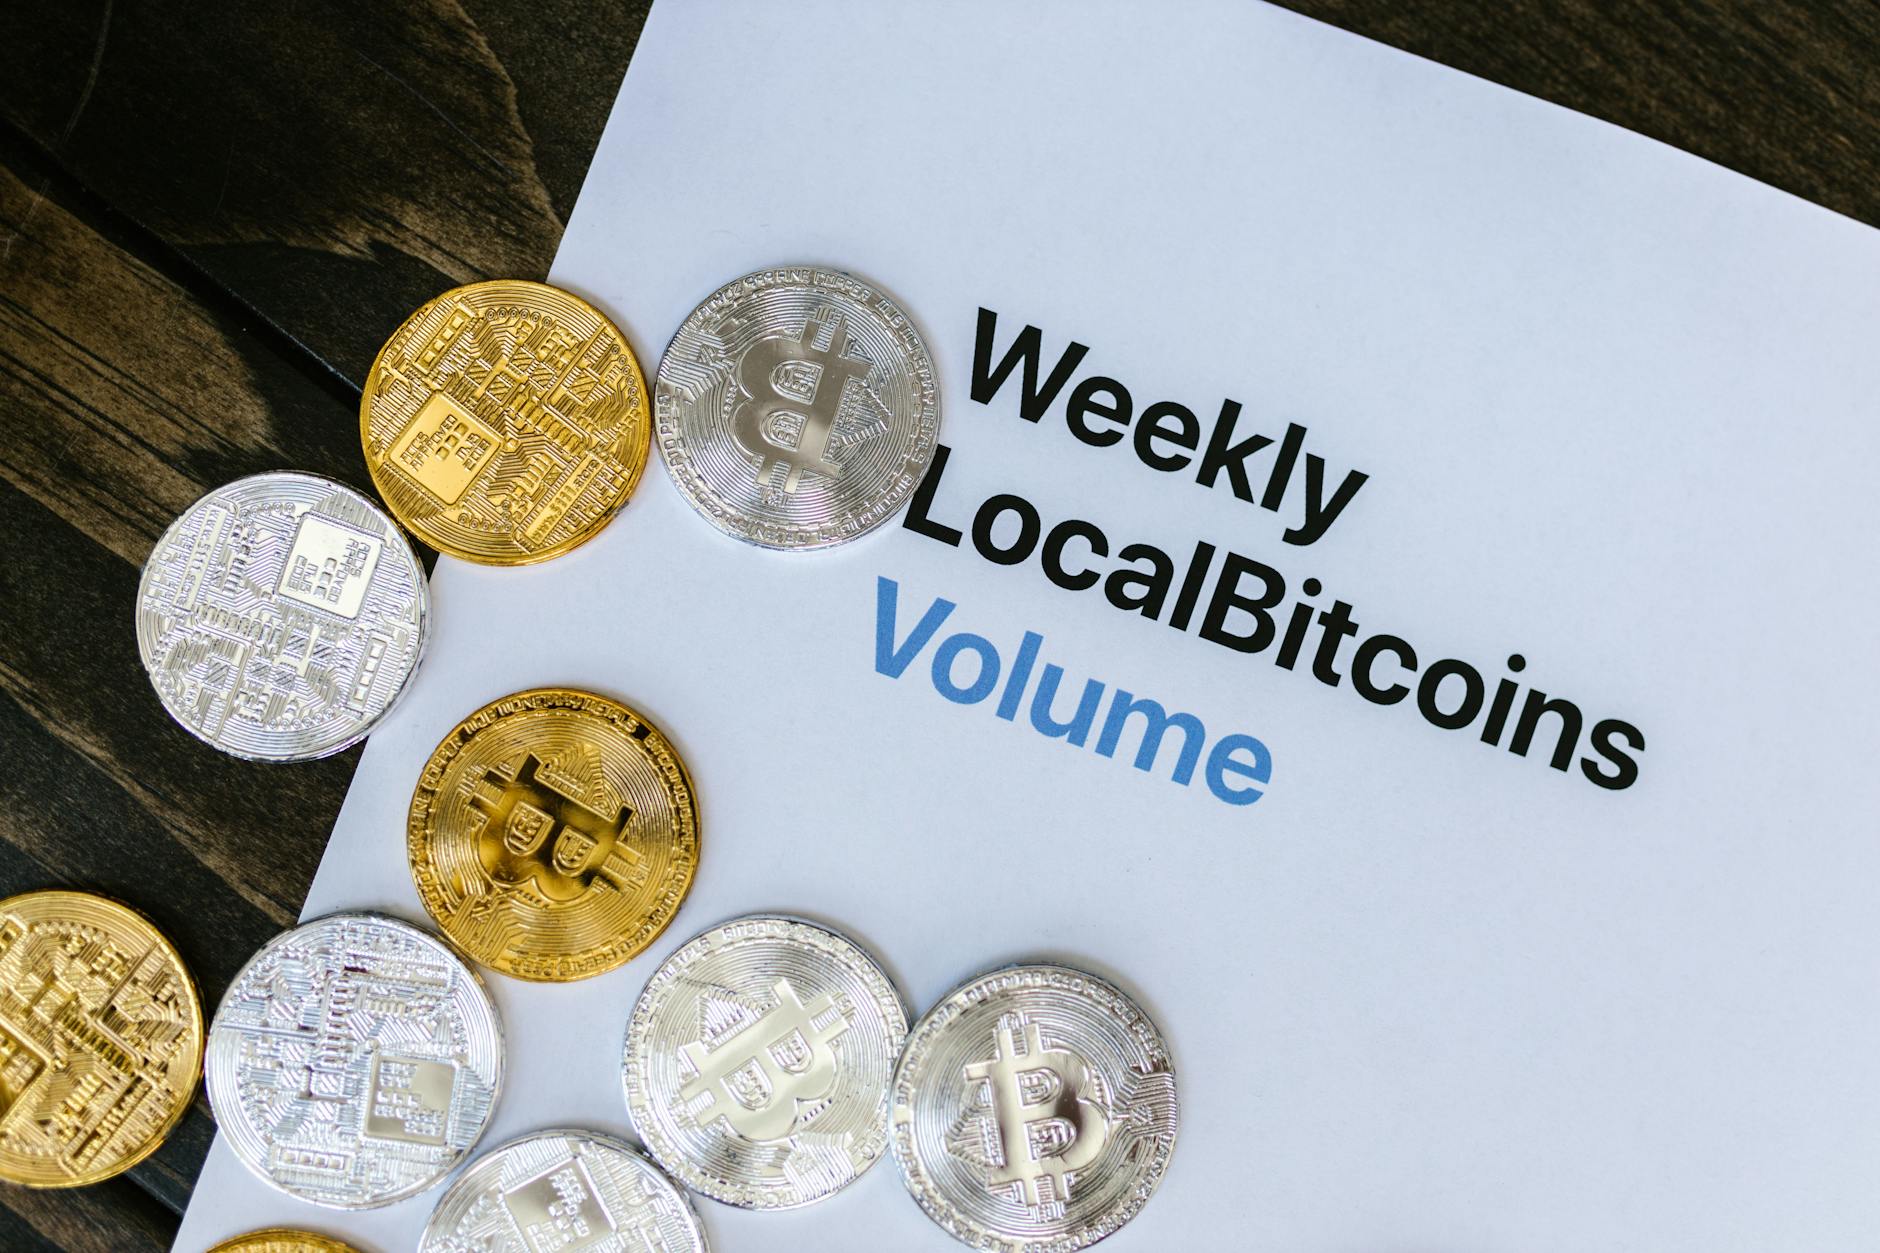 Silver and Golden Bitcoin Tokens Scattered over a Finance Report